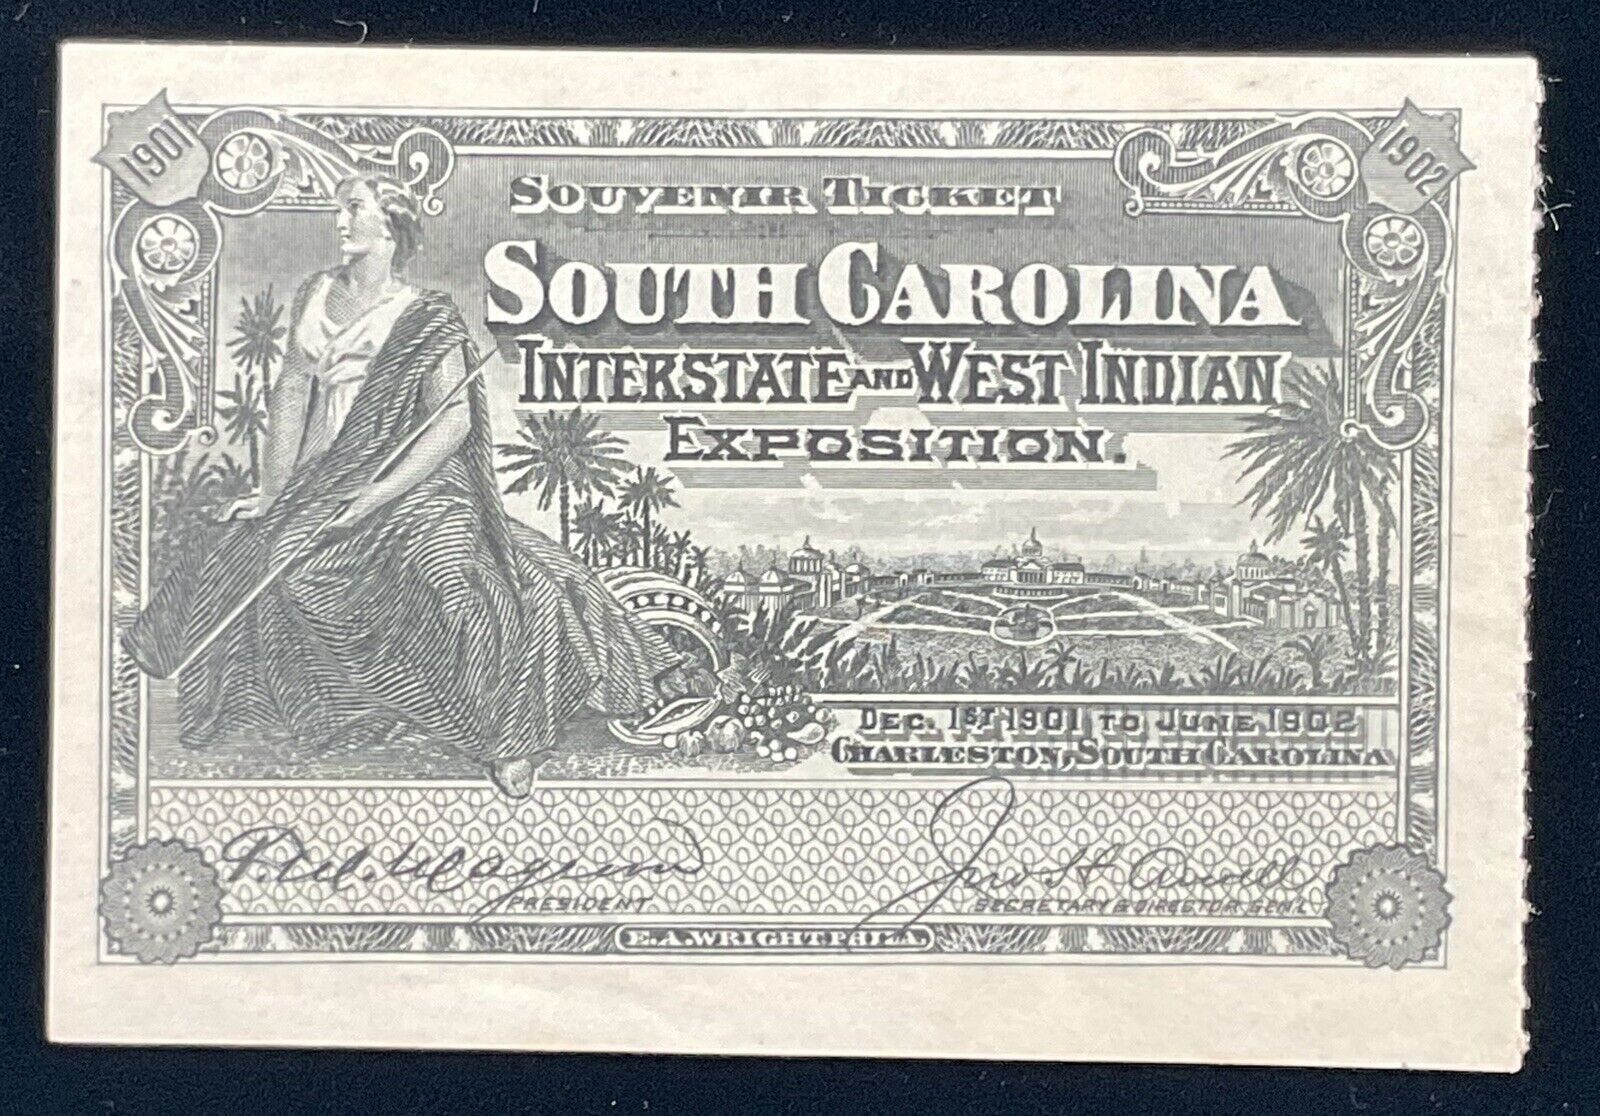 1901-1902 South Carolina Interstate and West Indian Exposition Souvenir Ticket